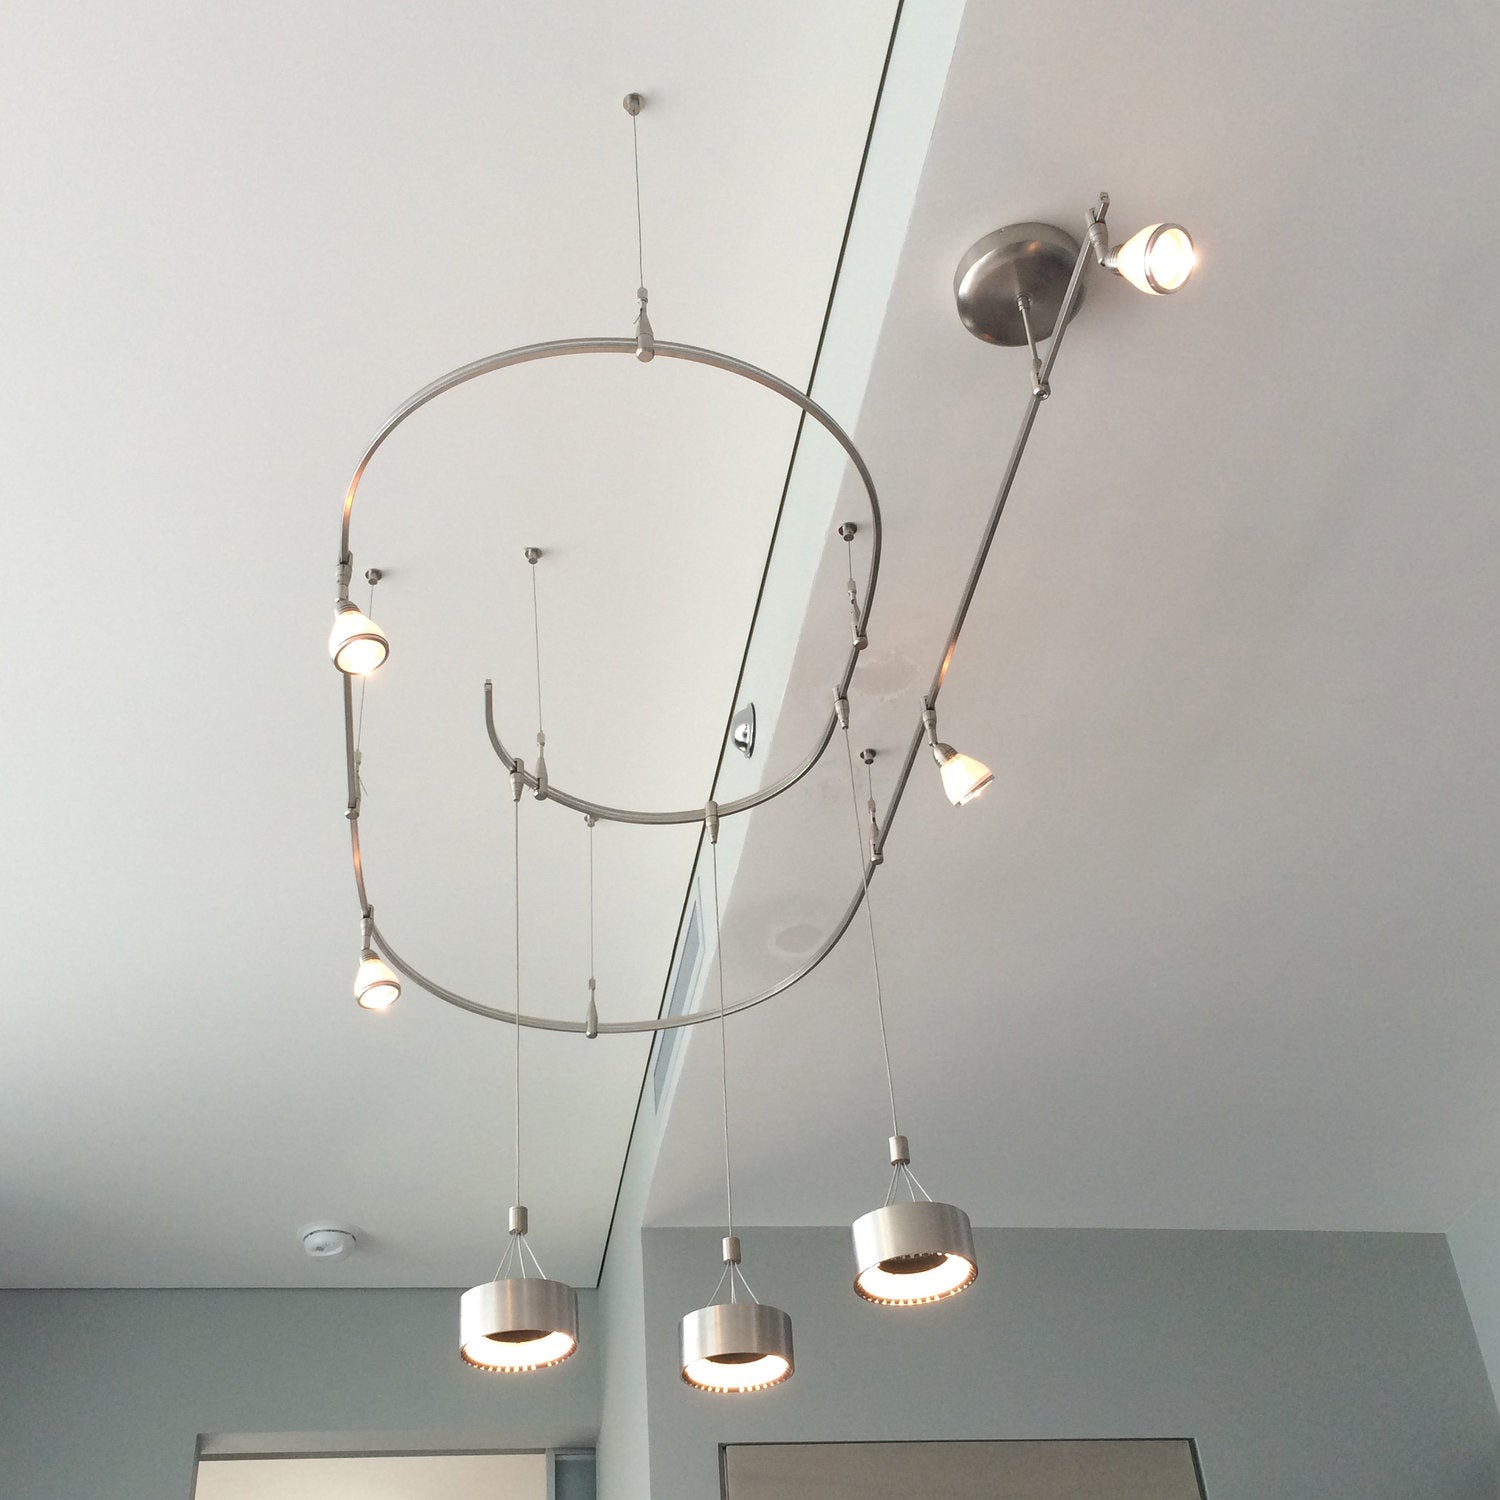 Get a free estimate of how much your pendant monorail lighting installation would cost in California.